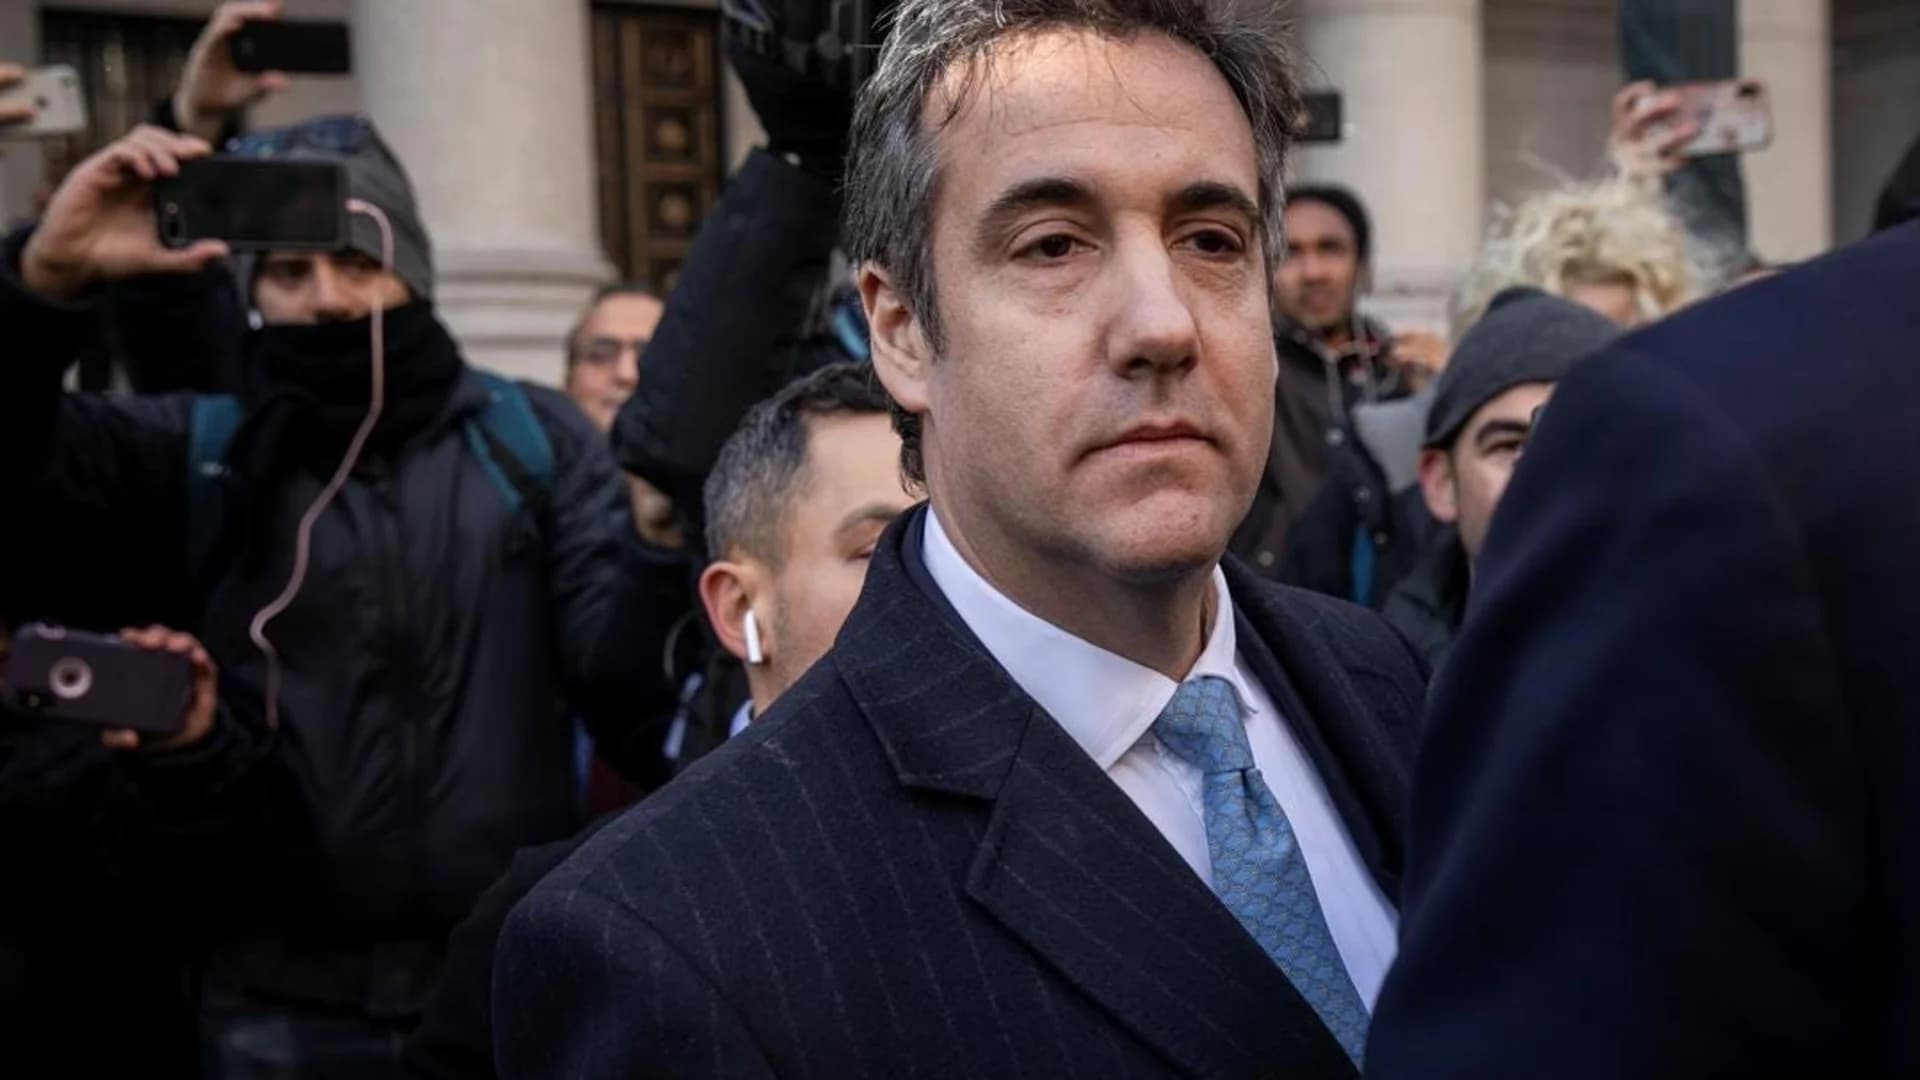 President Trump's ex-lawyer Michael Cohen admits lies about Russian real estate deal